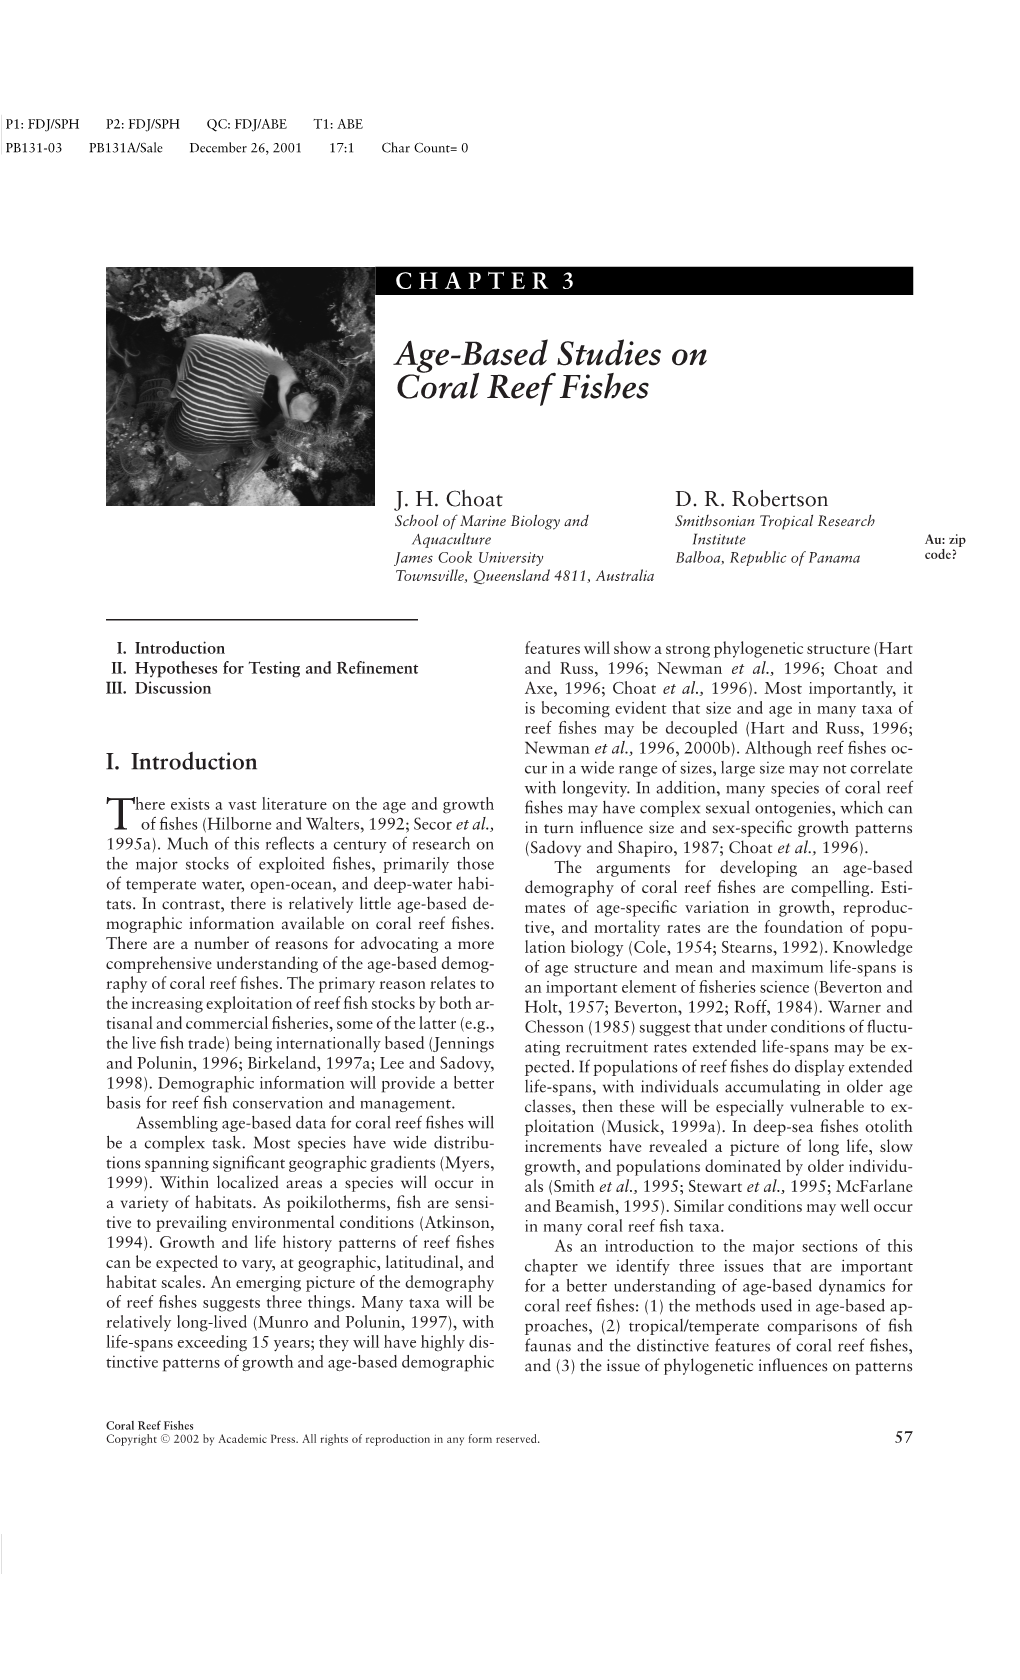 Age-Based Studies on Coral Reef Fishes